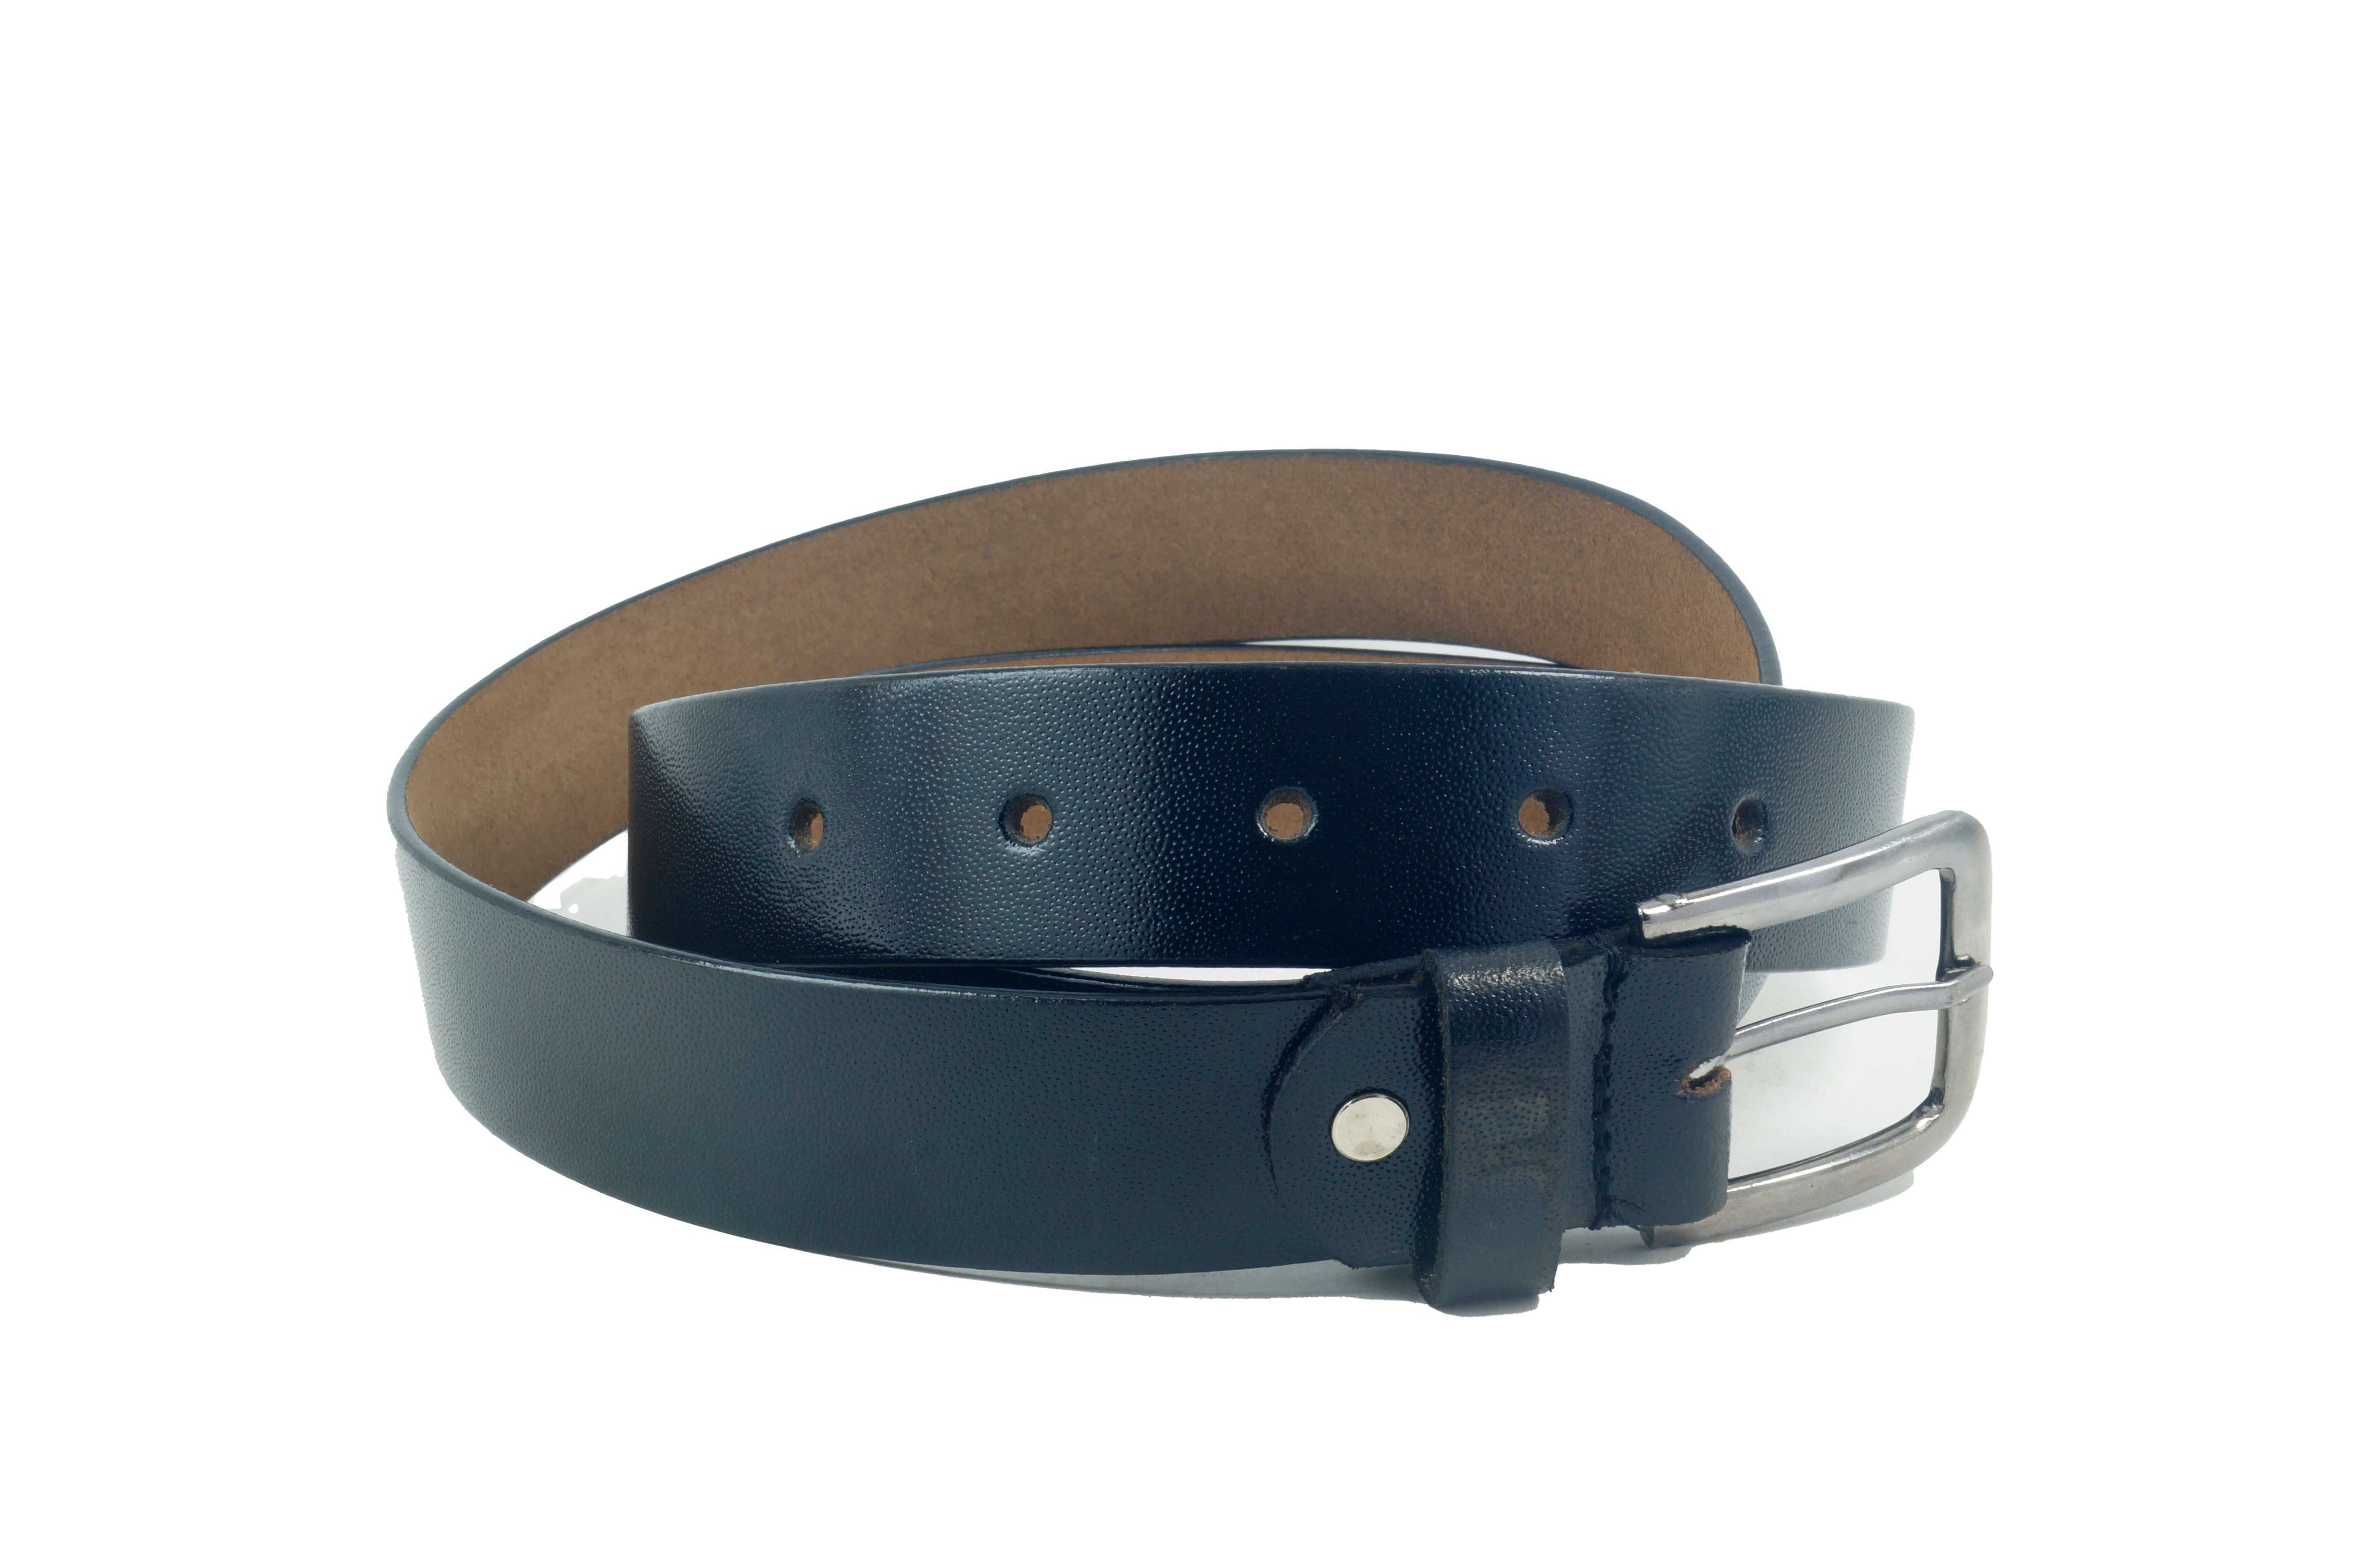 Pure Leather chrome  Belt by Vhaan